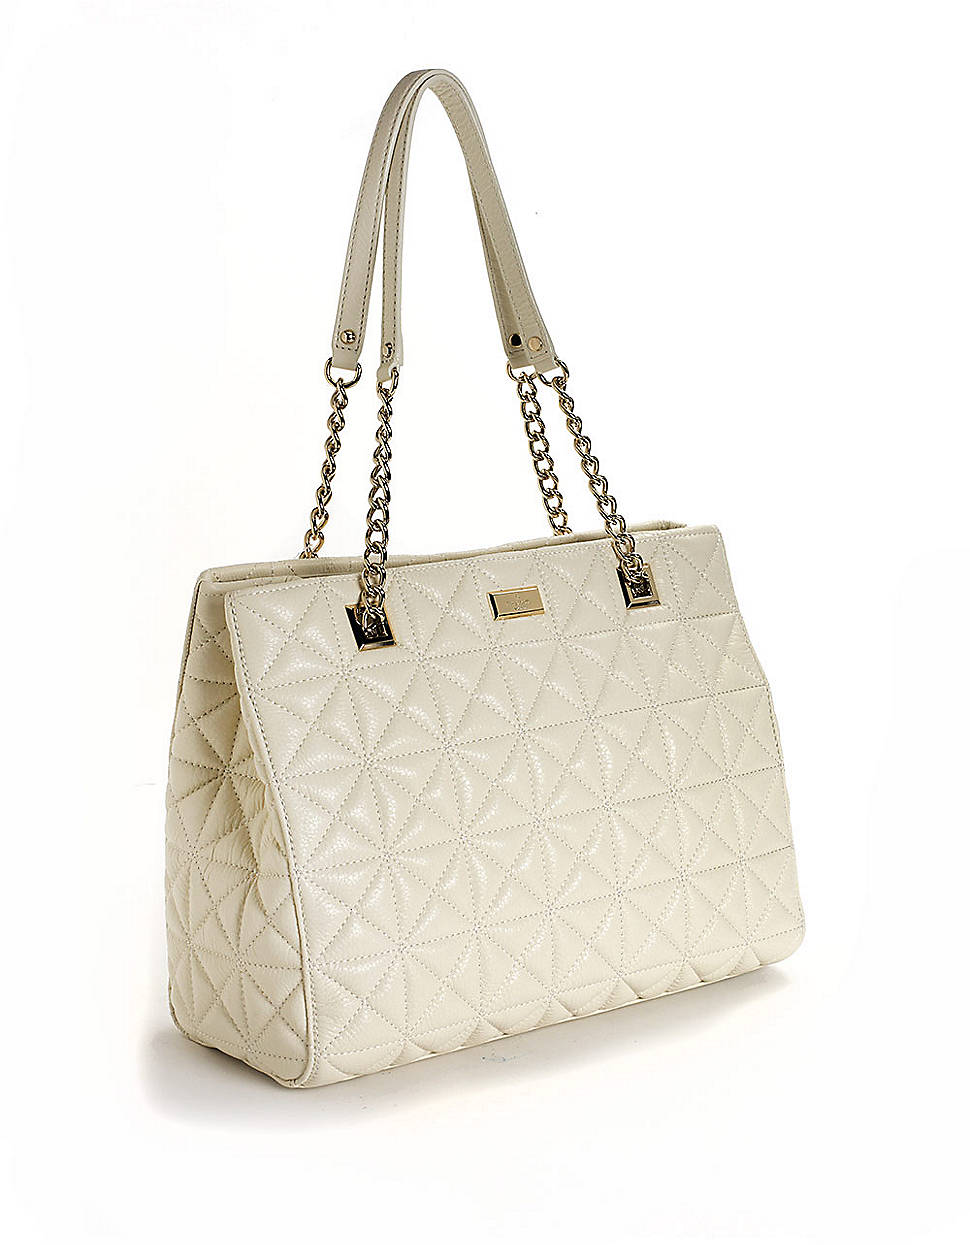 Kate Spade Sedgewick Place Phoebe Quilted Leather Shoulder Bag in Beige ...